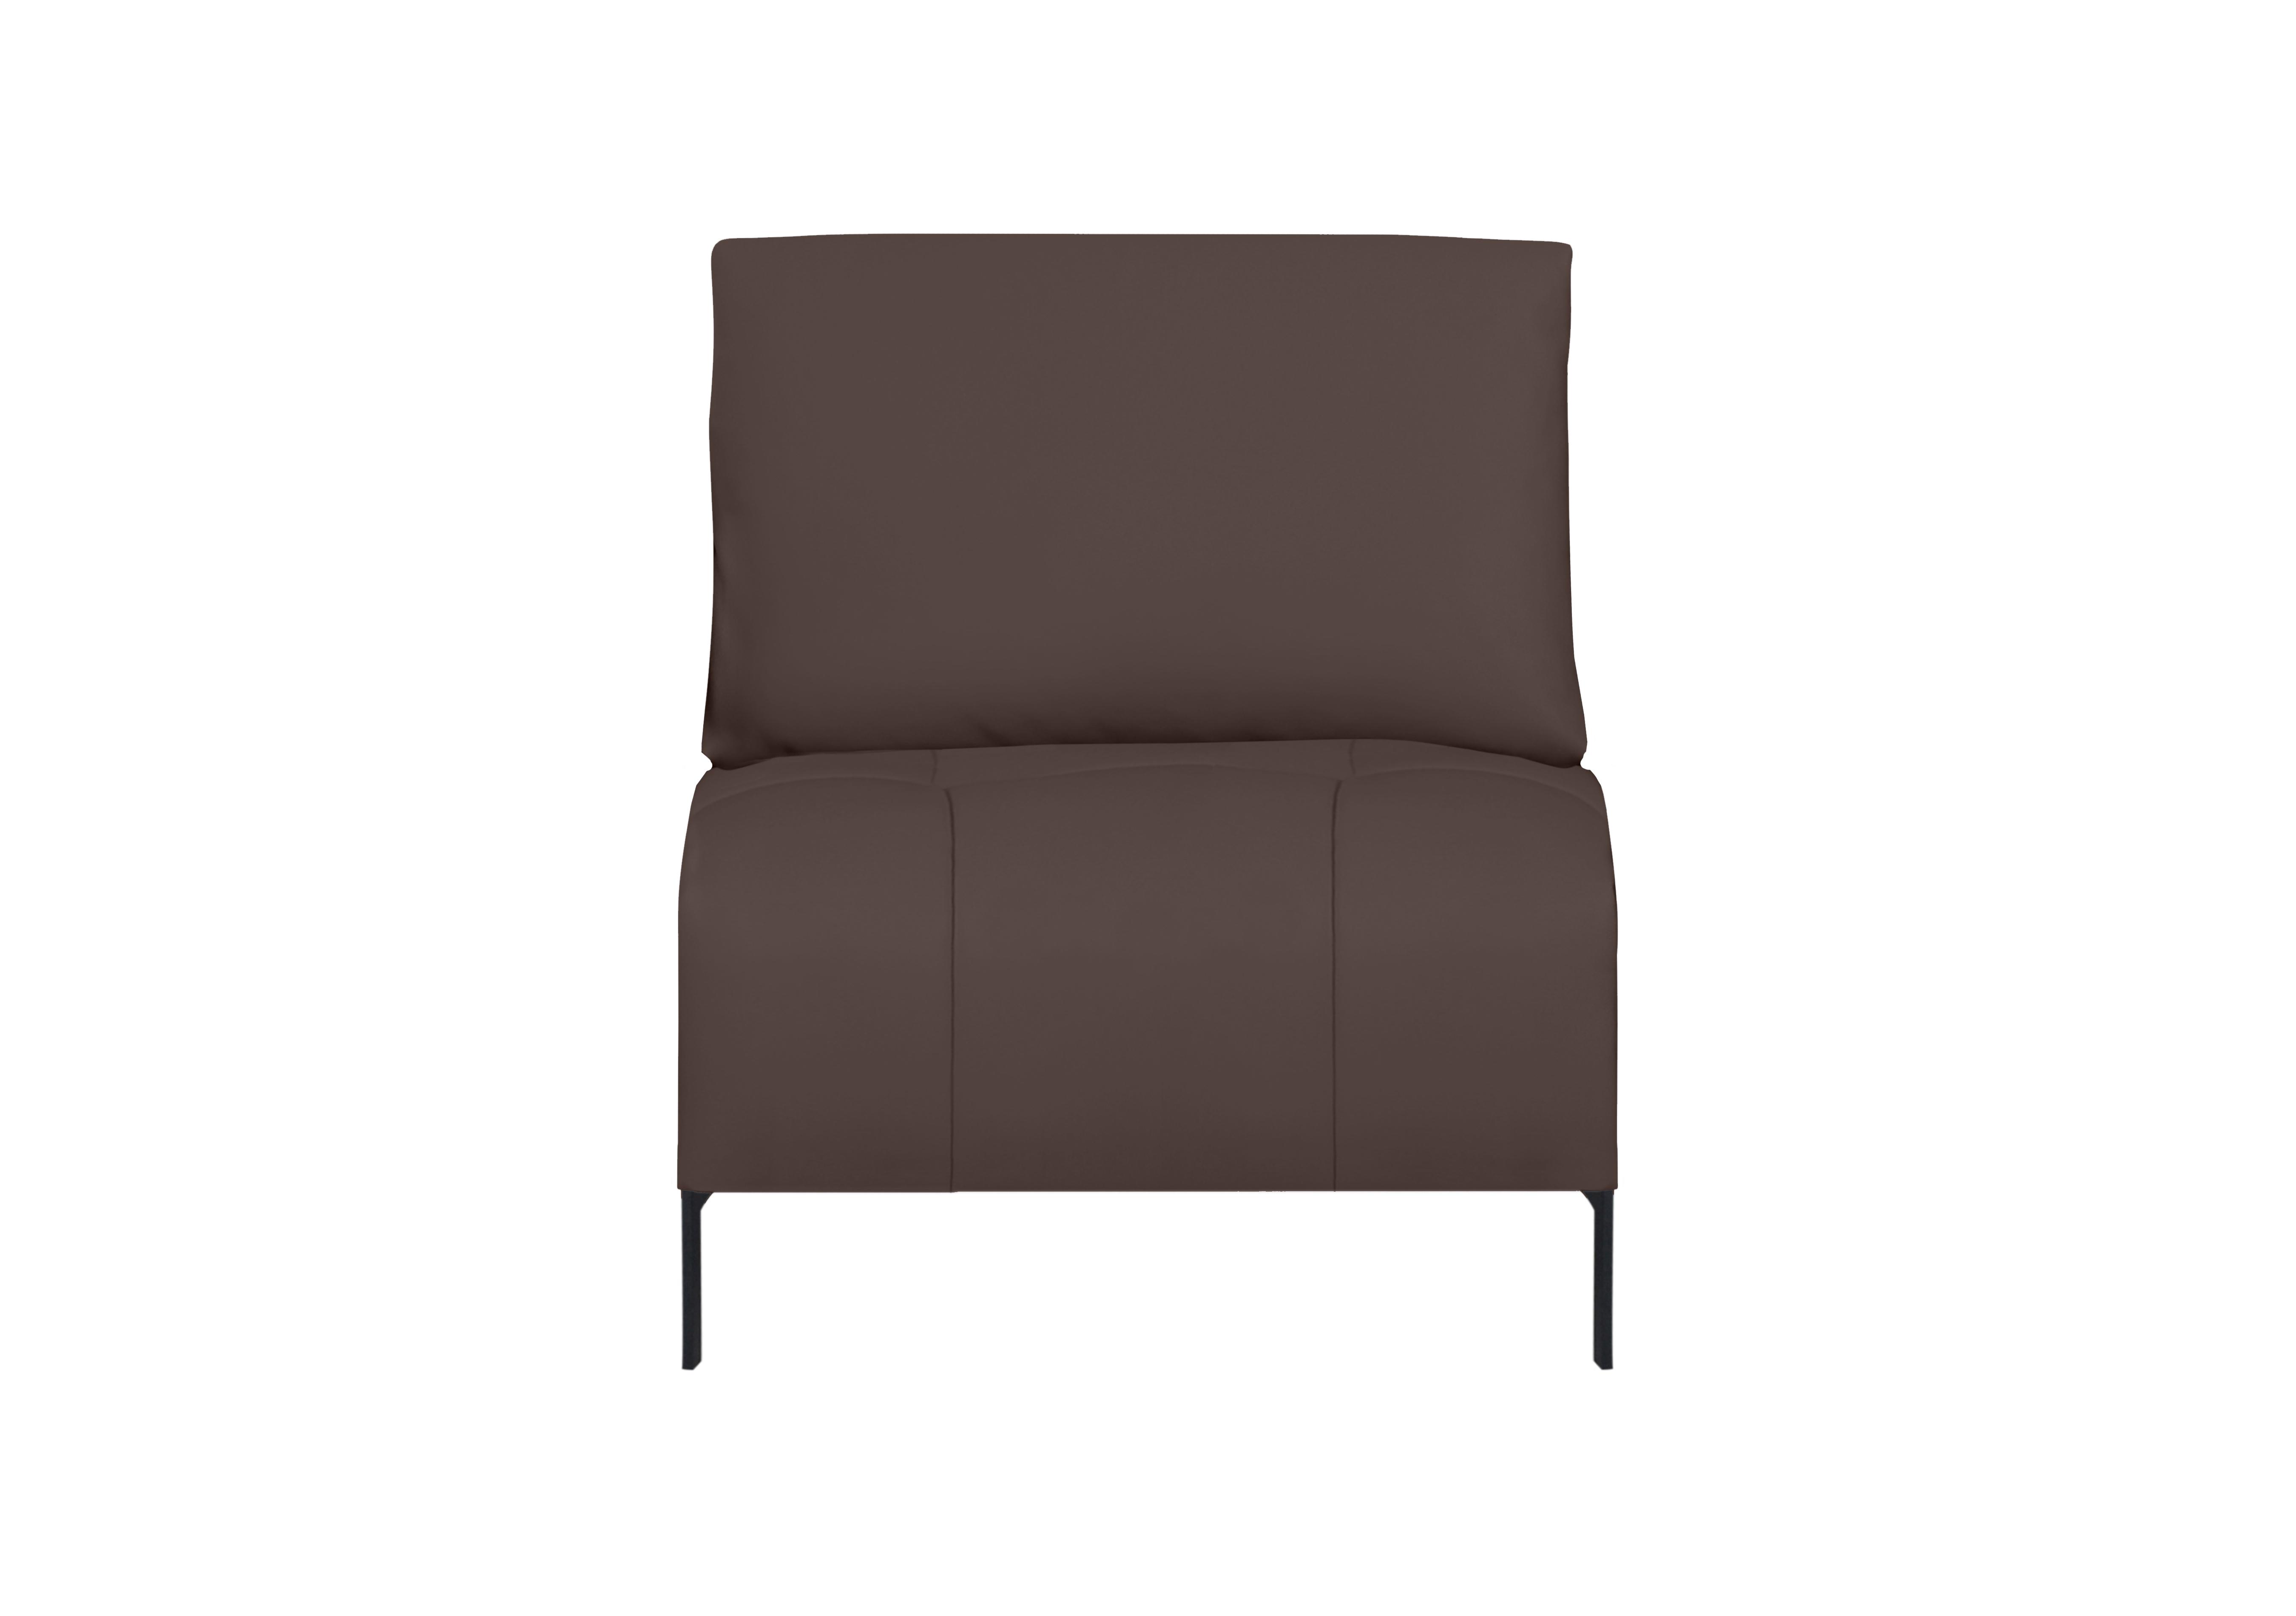 Lawson Leather 1.5 Seater Armless Unit in Nn-512e Cacao Brown on Furniture Village